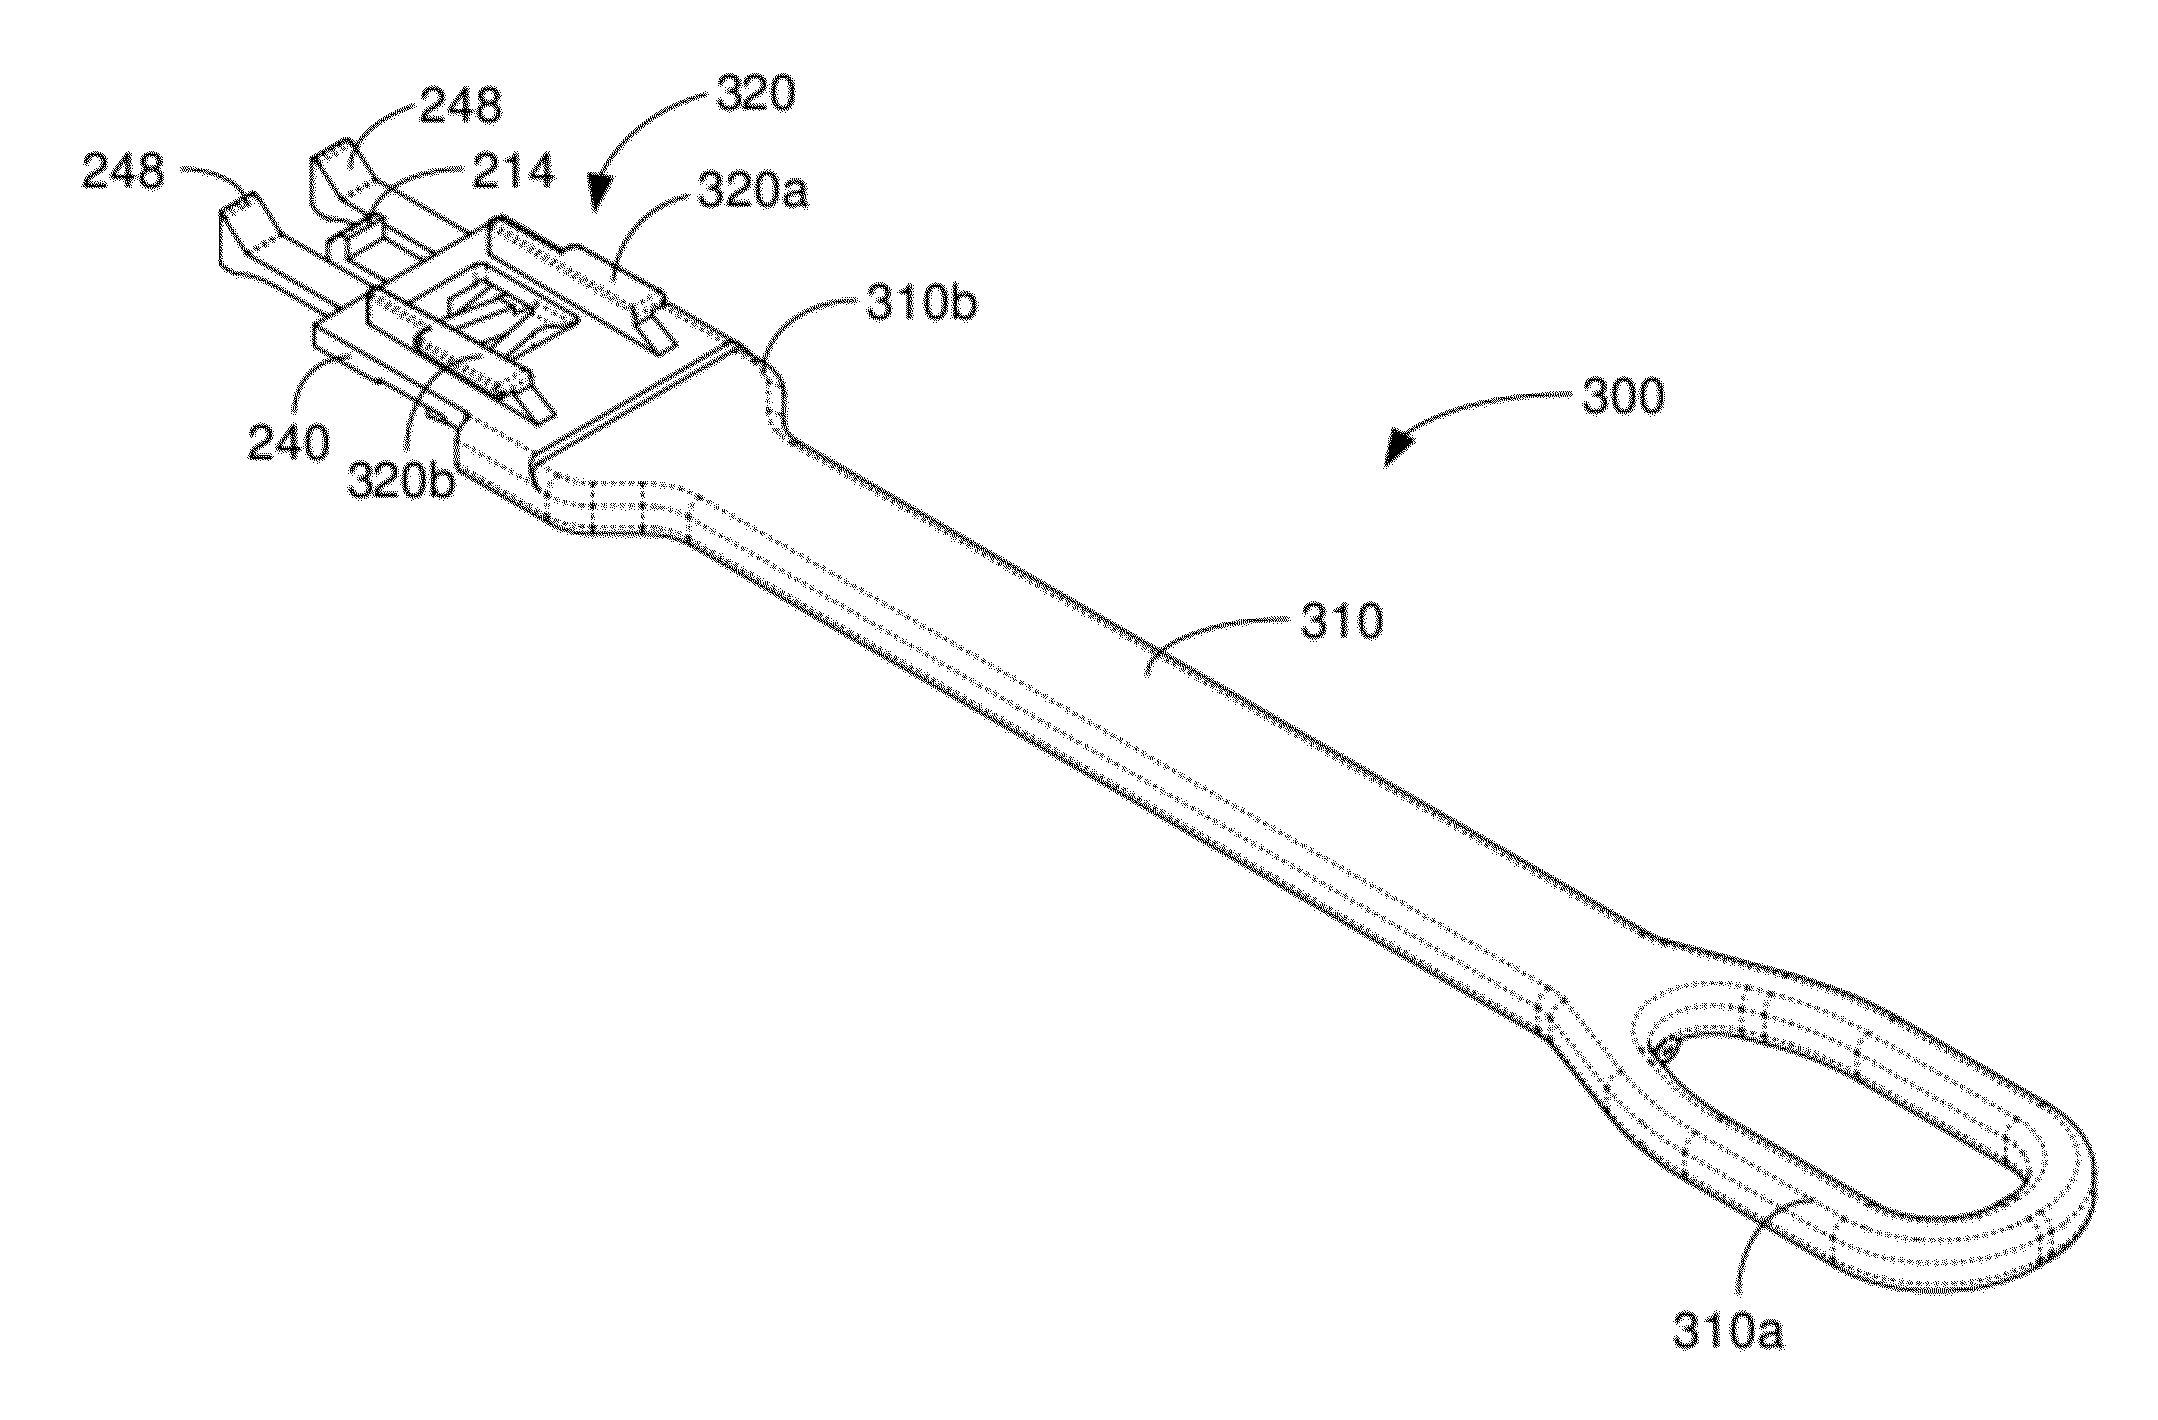 Delatch device having both push and pull operability for use with an optical transceiver module, and a method